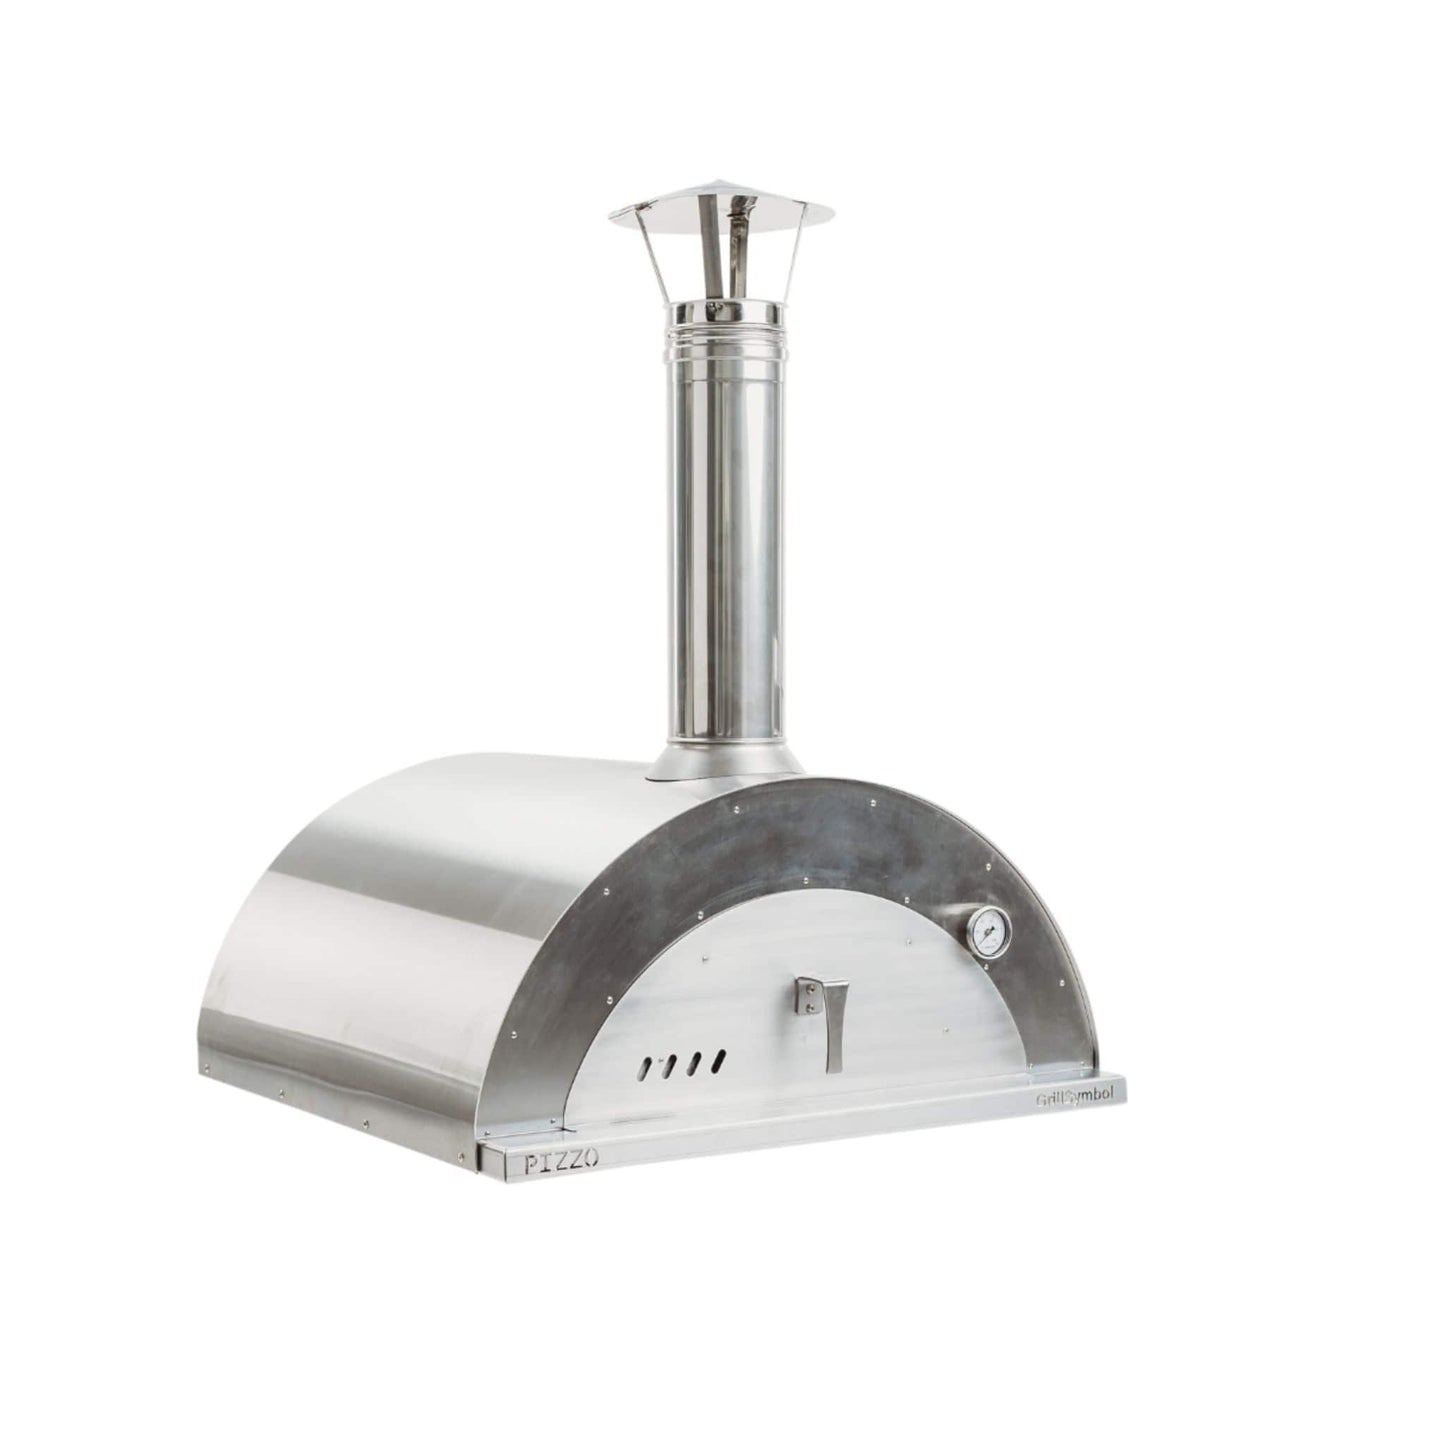 GrillSymbol stainless steel Wood Fired Pizza Oven Pizzo-inox